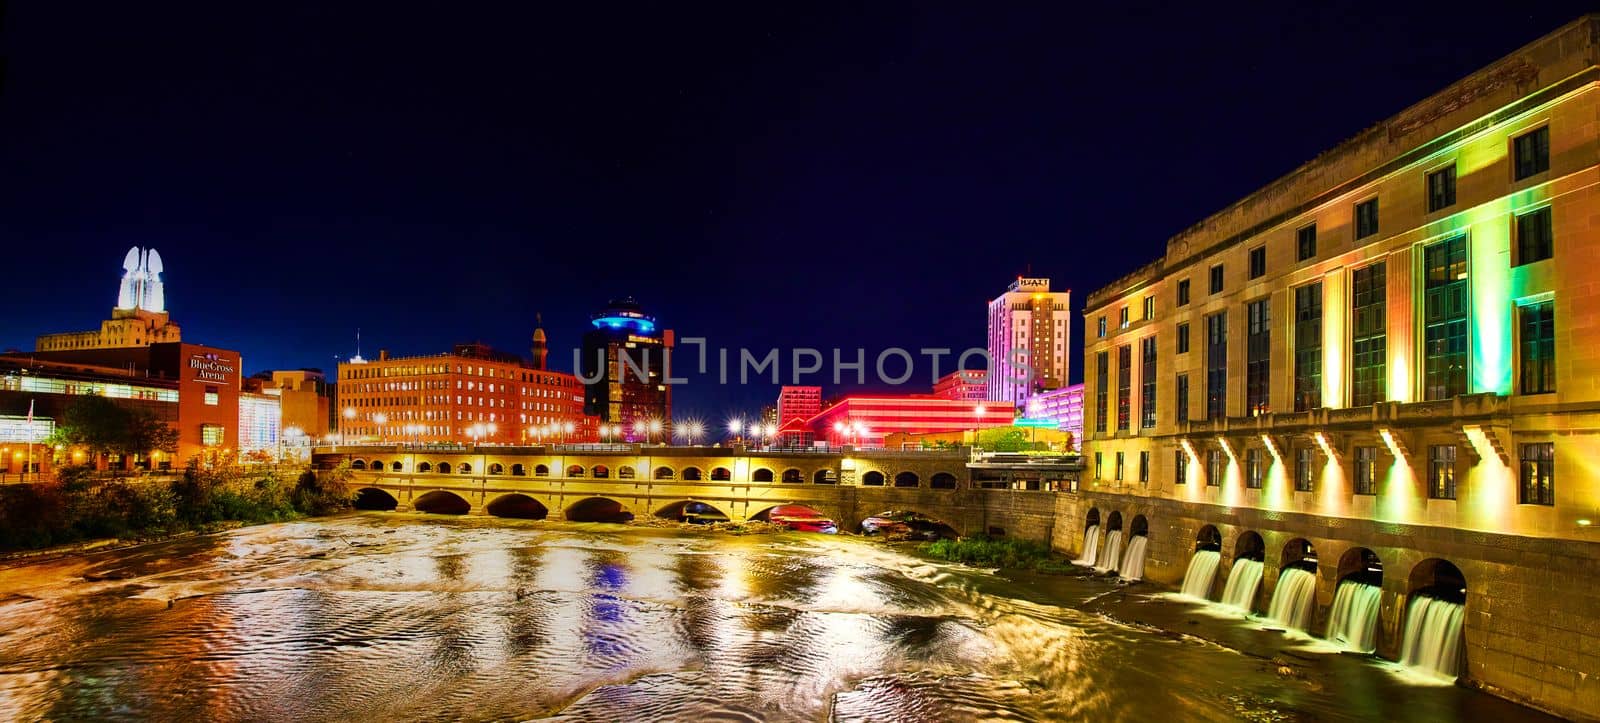 Image of Manmade waterfalls and river in Rochester New York at night with city lights